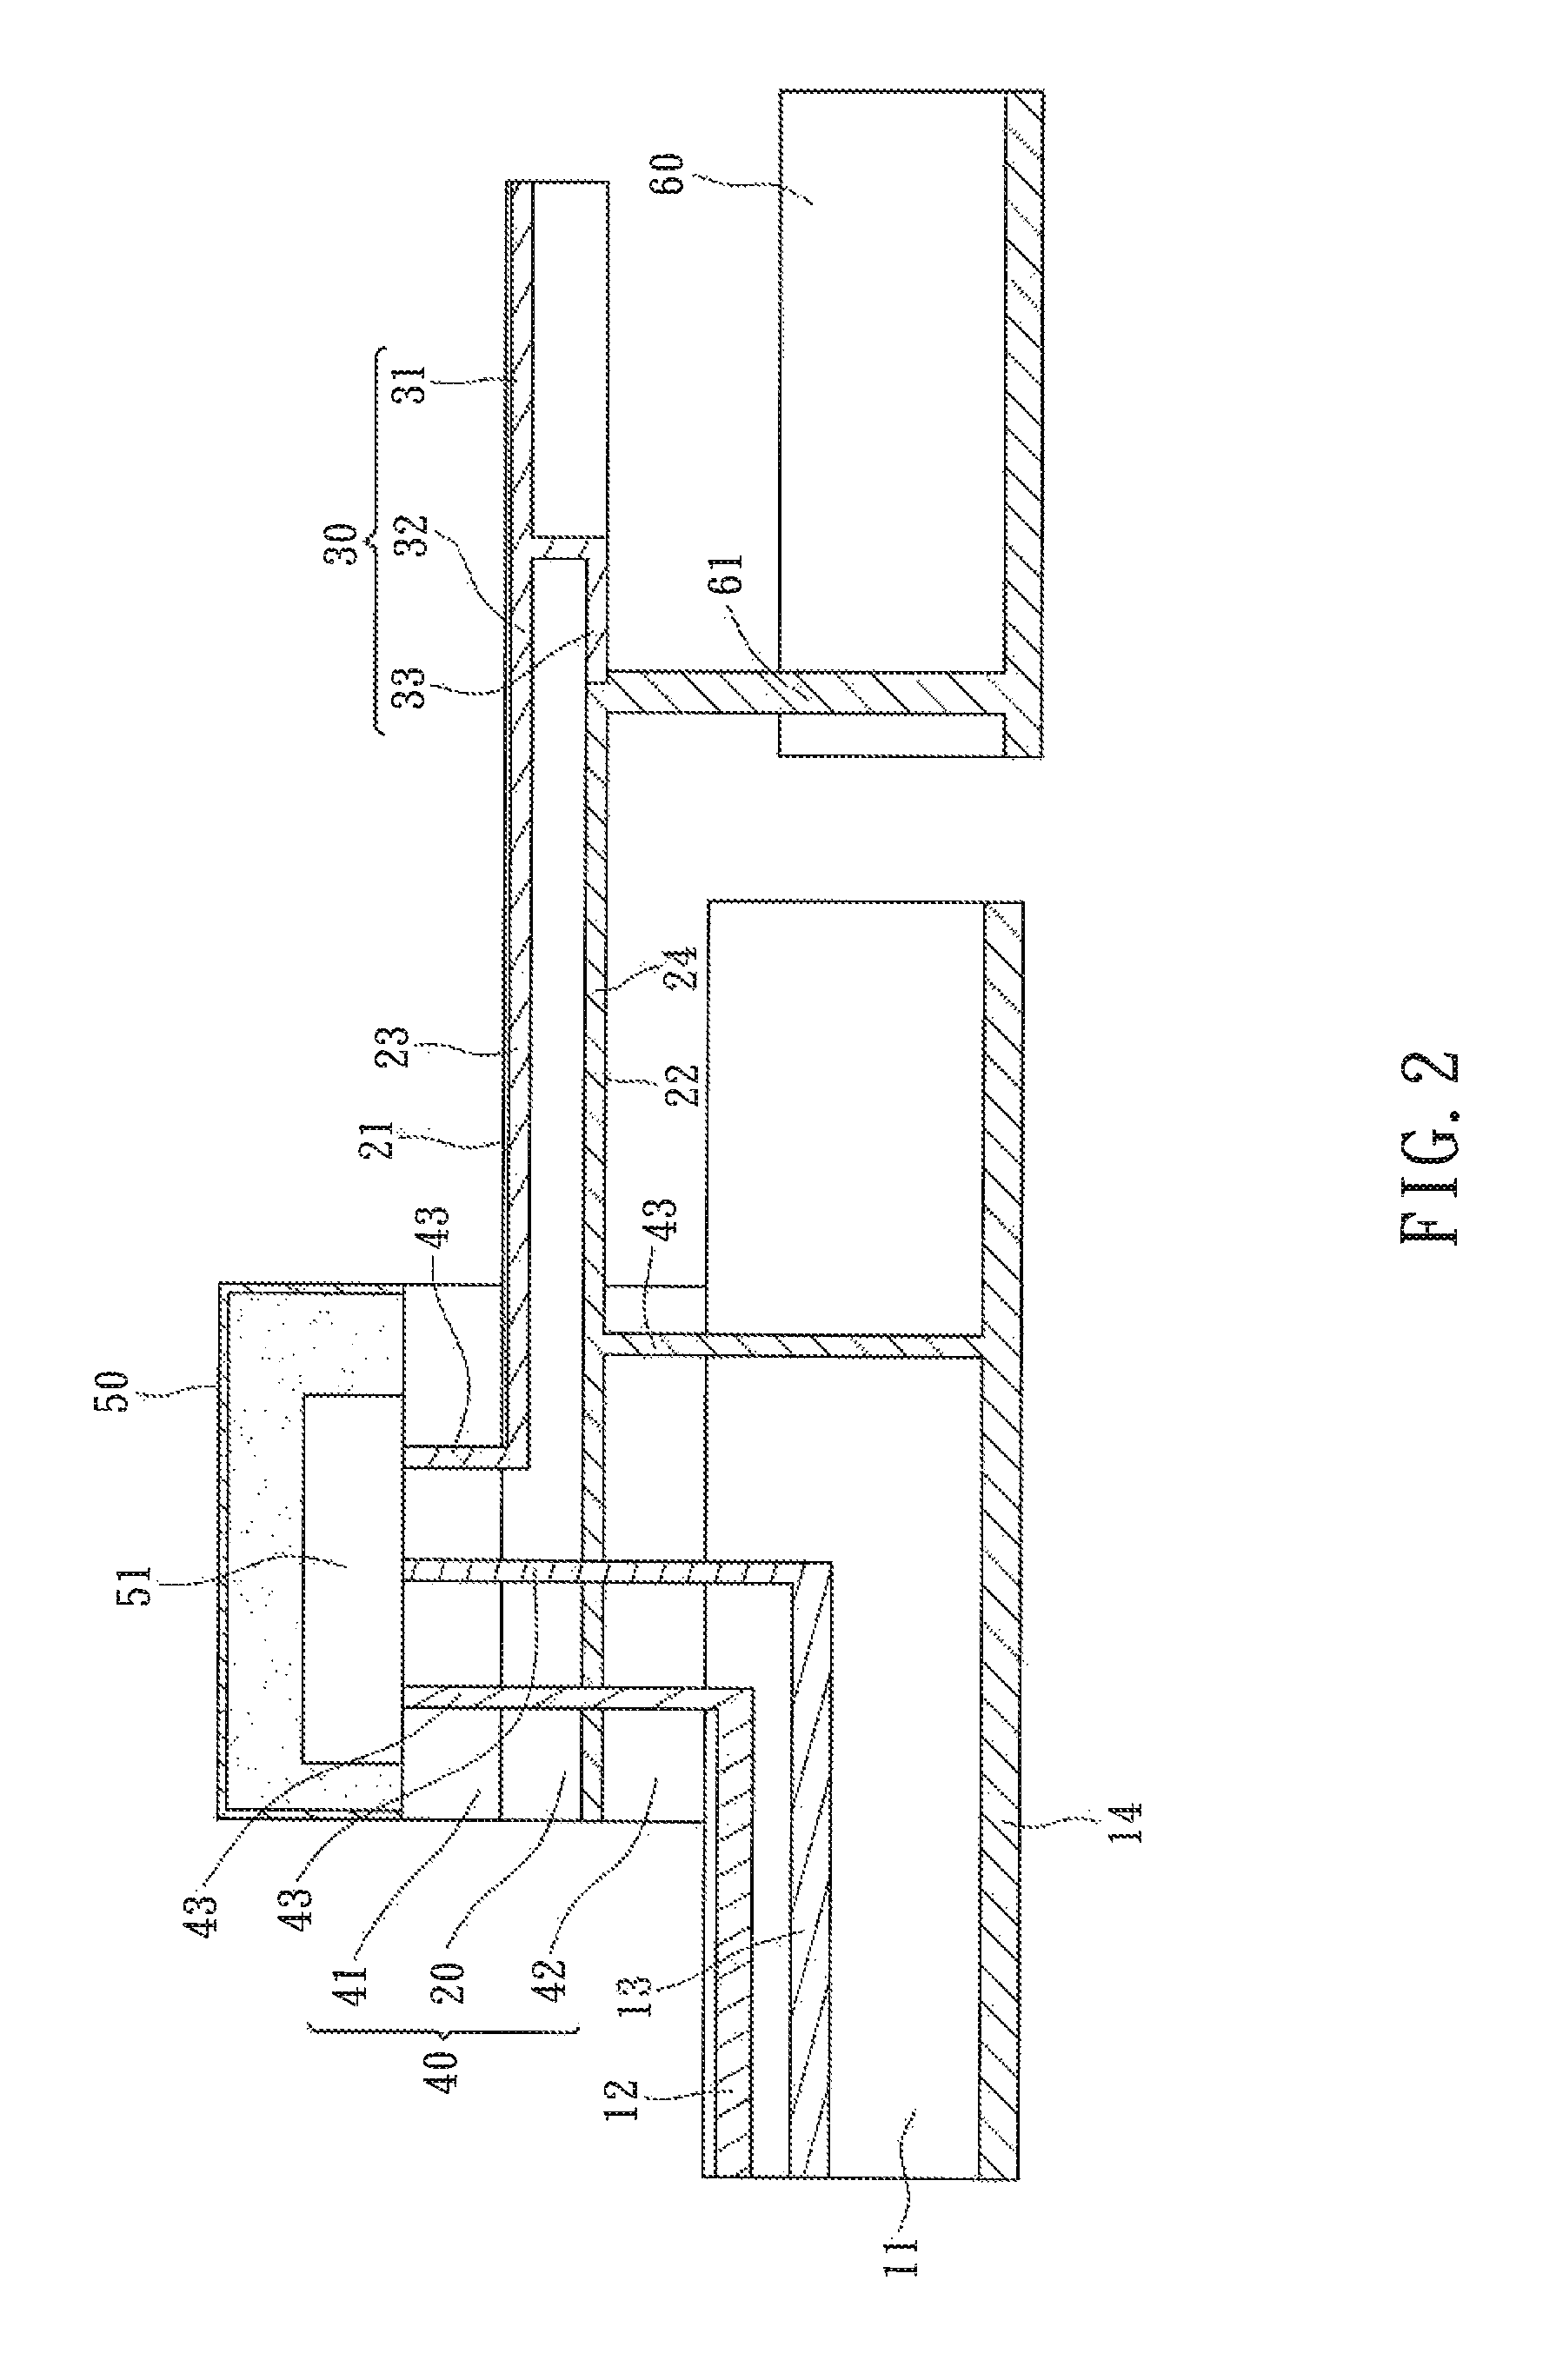 Wireless module with integrated antenna by using rigid-flex board